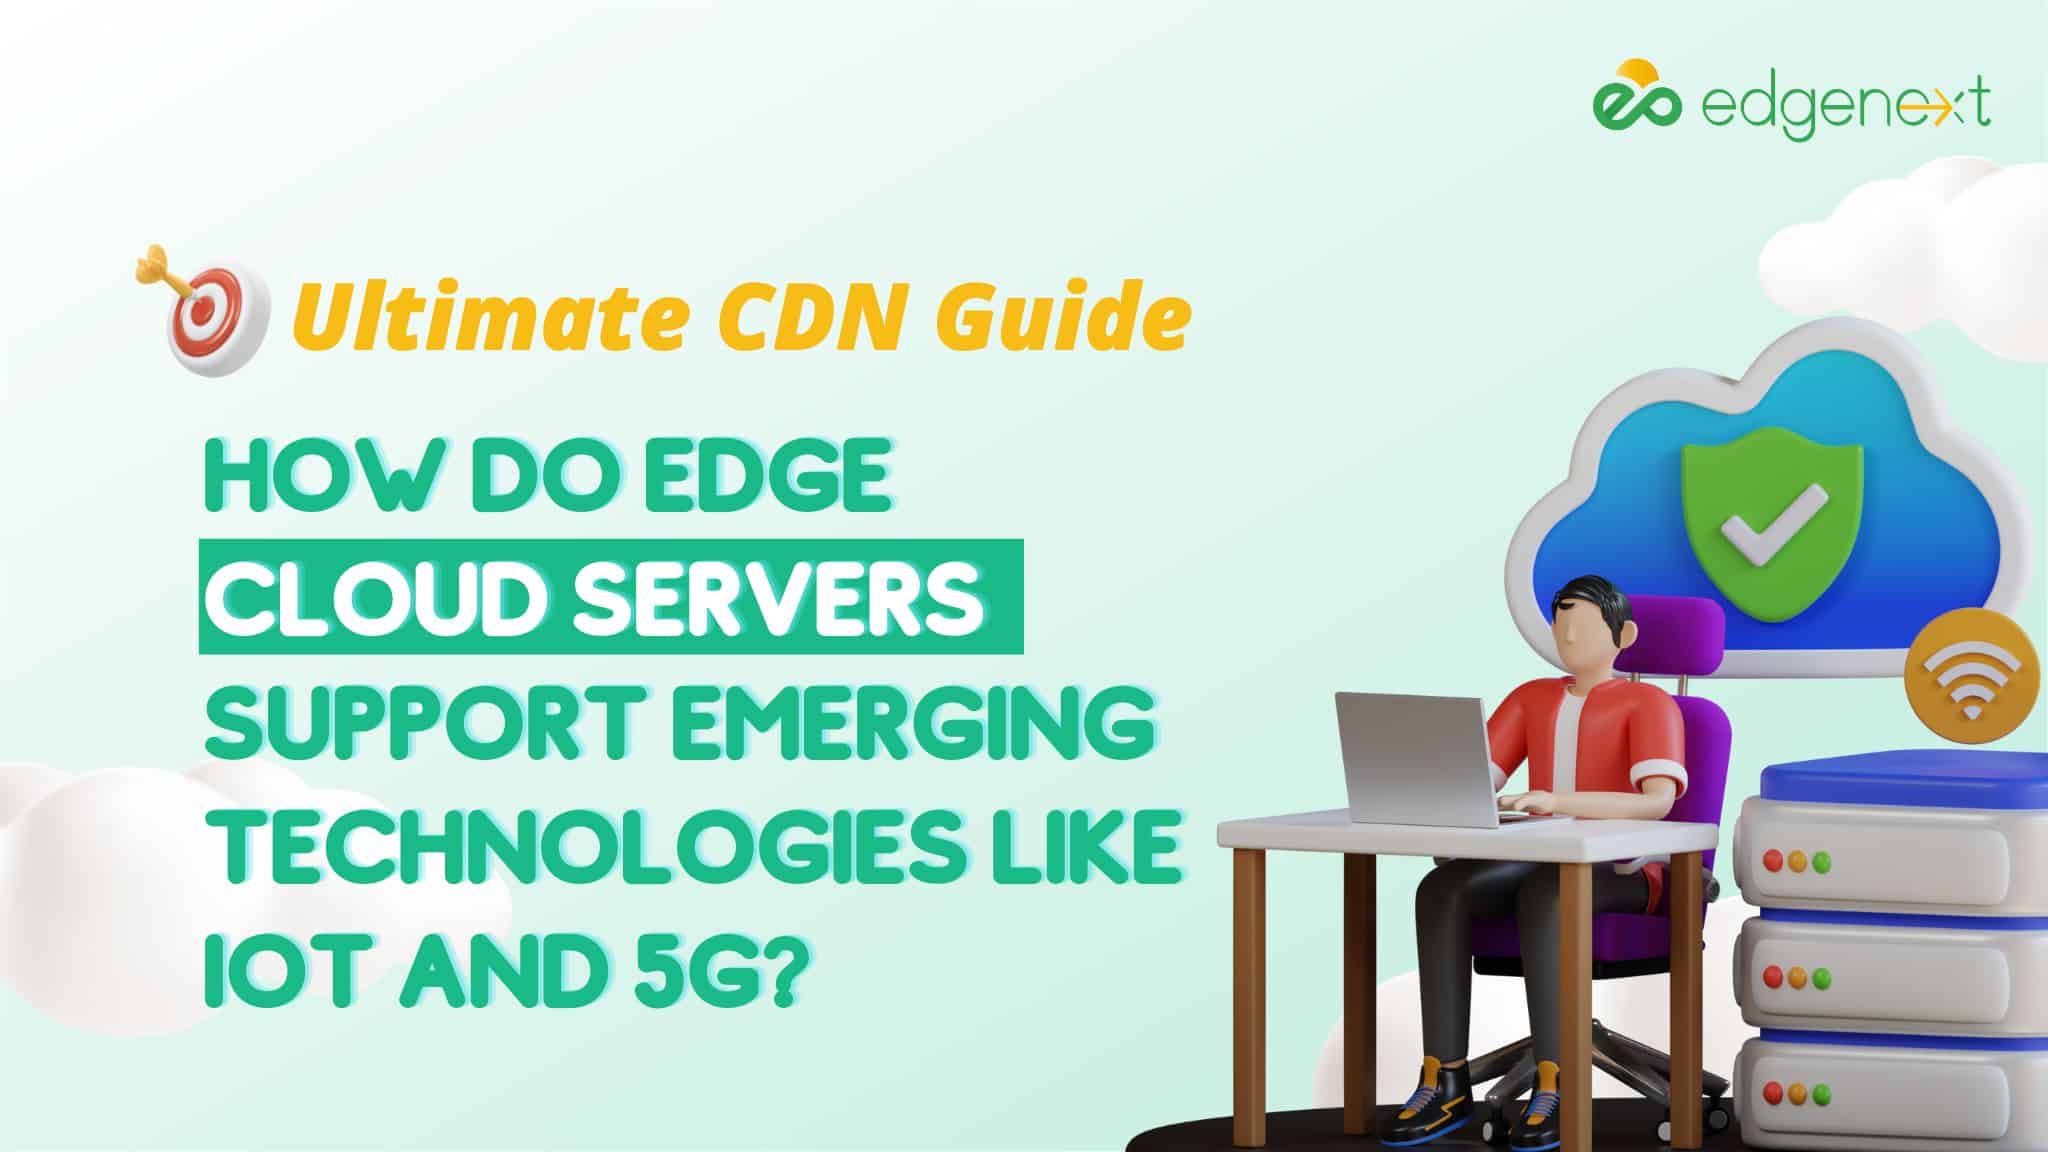 How Do Edge Cloud Servers Support Emerging Technologies Like IoT and 5G? 